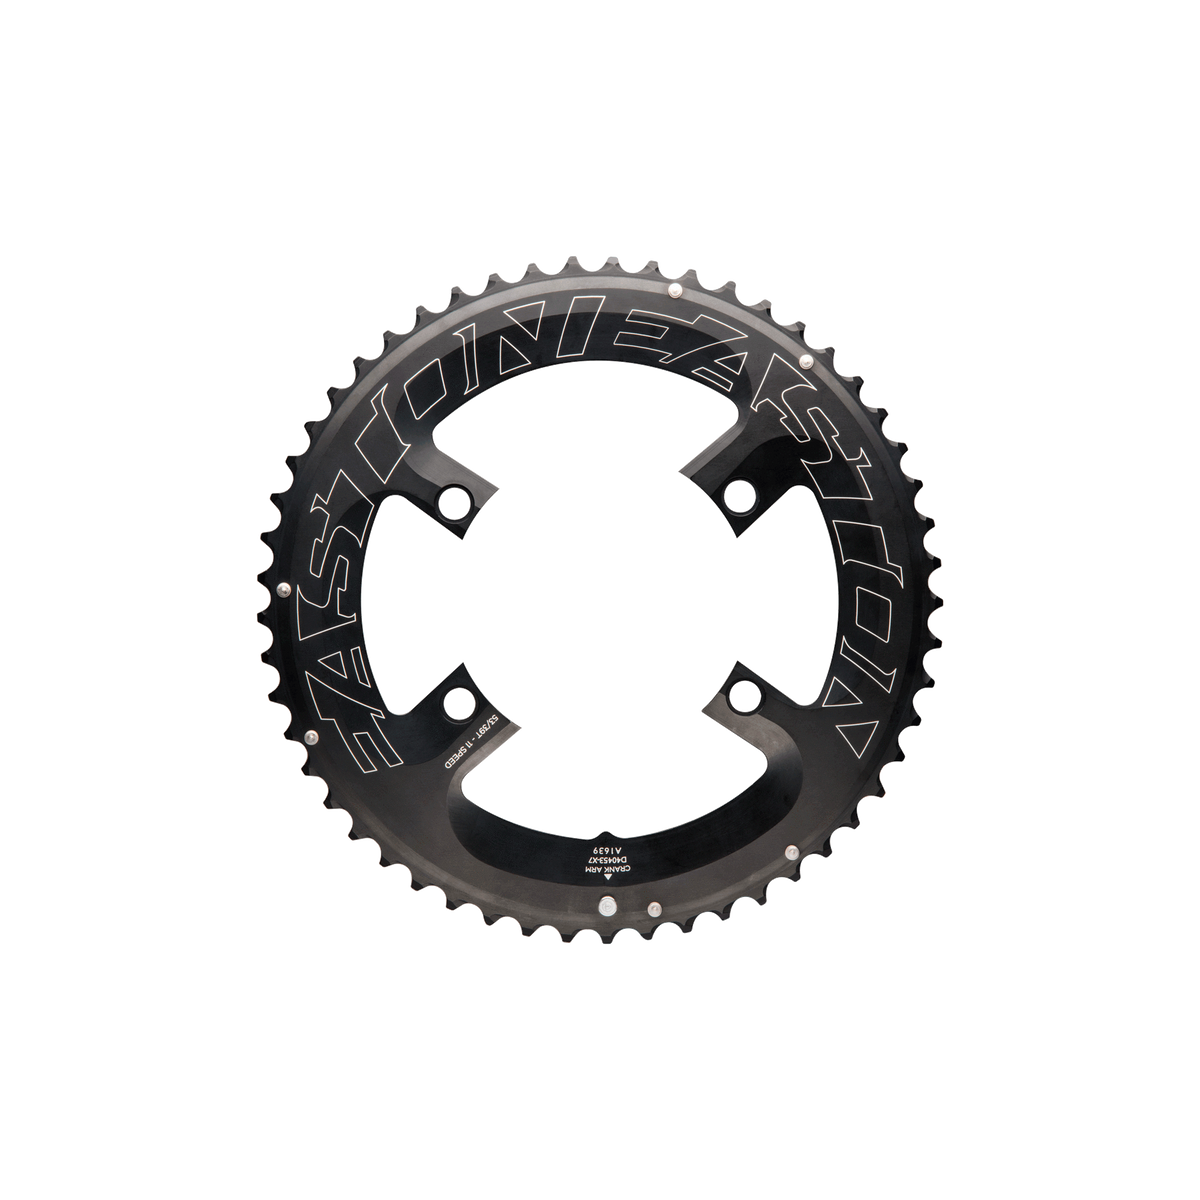 Voeding Partina City relais Replacement Chainring - 11 Speed | Easton Cycling – Easton Cycling US